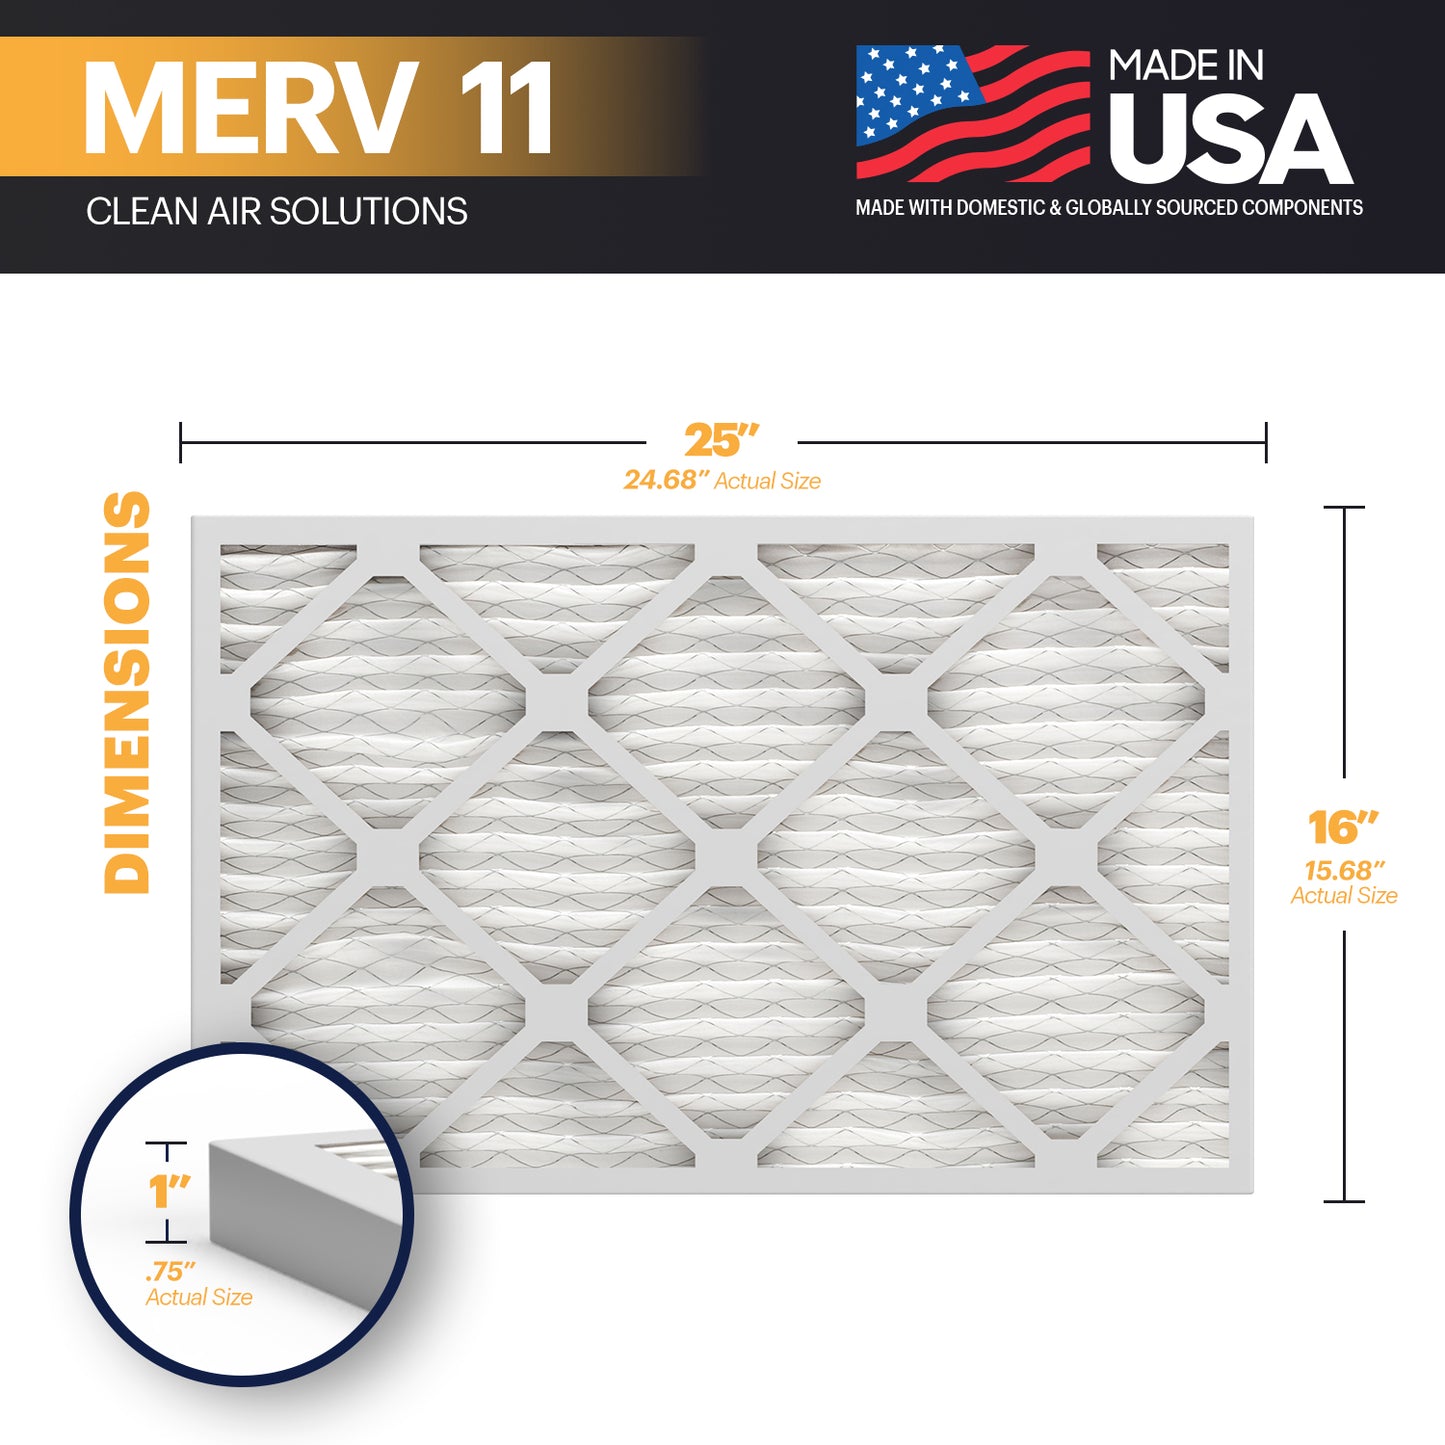 BNX TruFilter 16x25x1 Air Filter MERV 11 (6-Pack) - MADE IN USA - Allergen Defense Electrostatic Pleated Air Conditioner HVAC AC Furnace Filters for Allergies, Dust, Pet, Smoke, Allergy MPR 1200 FPR 7